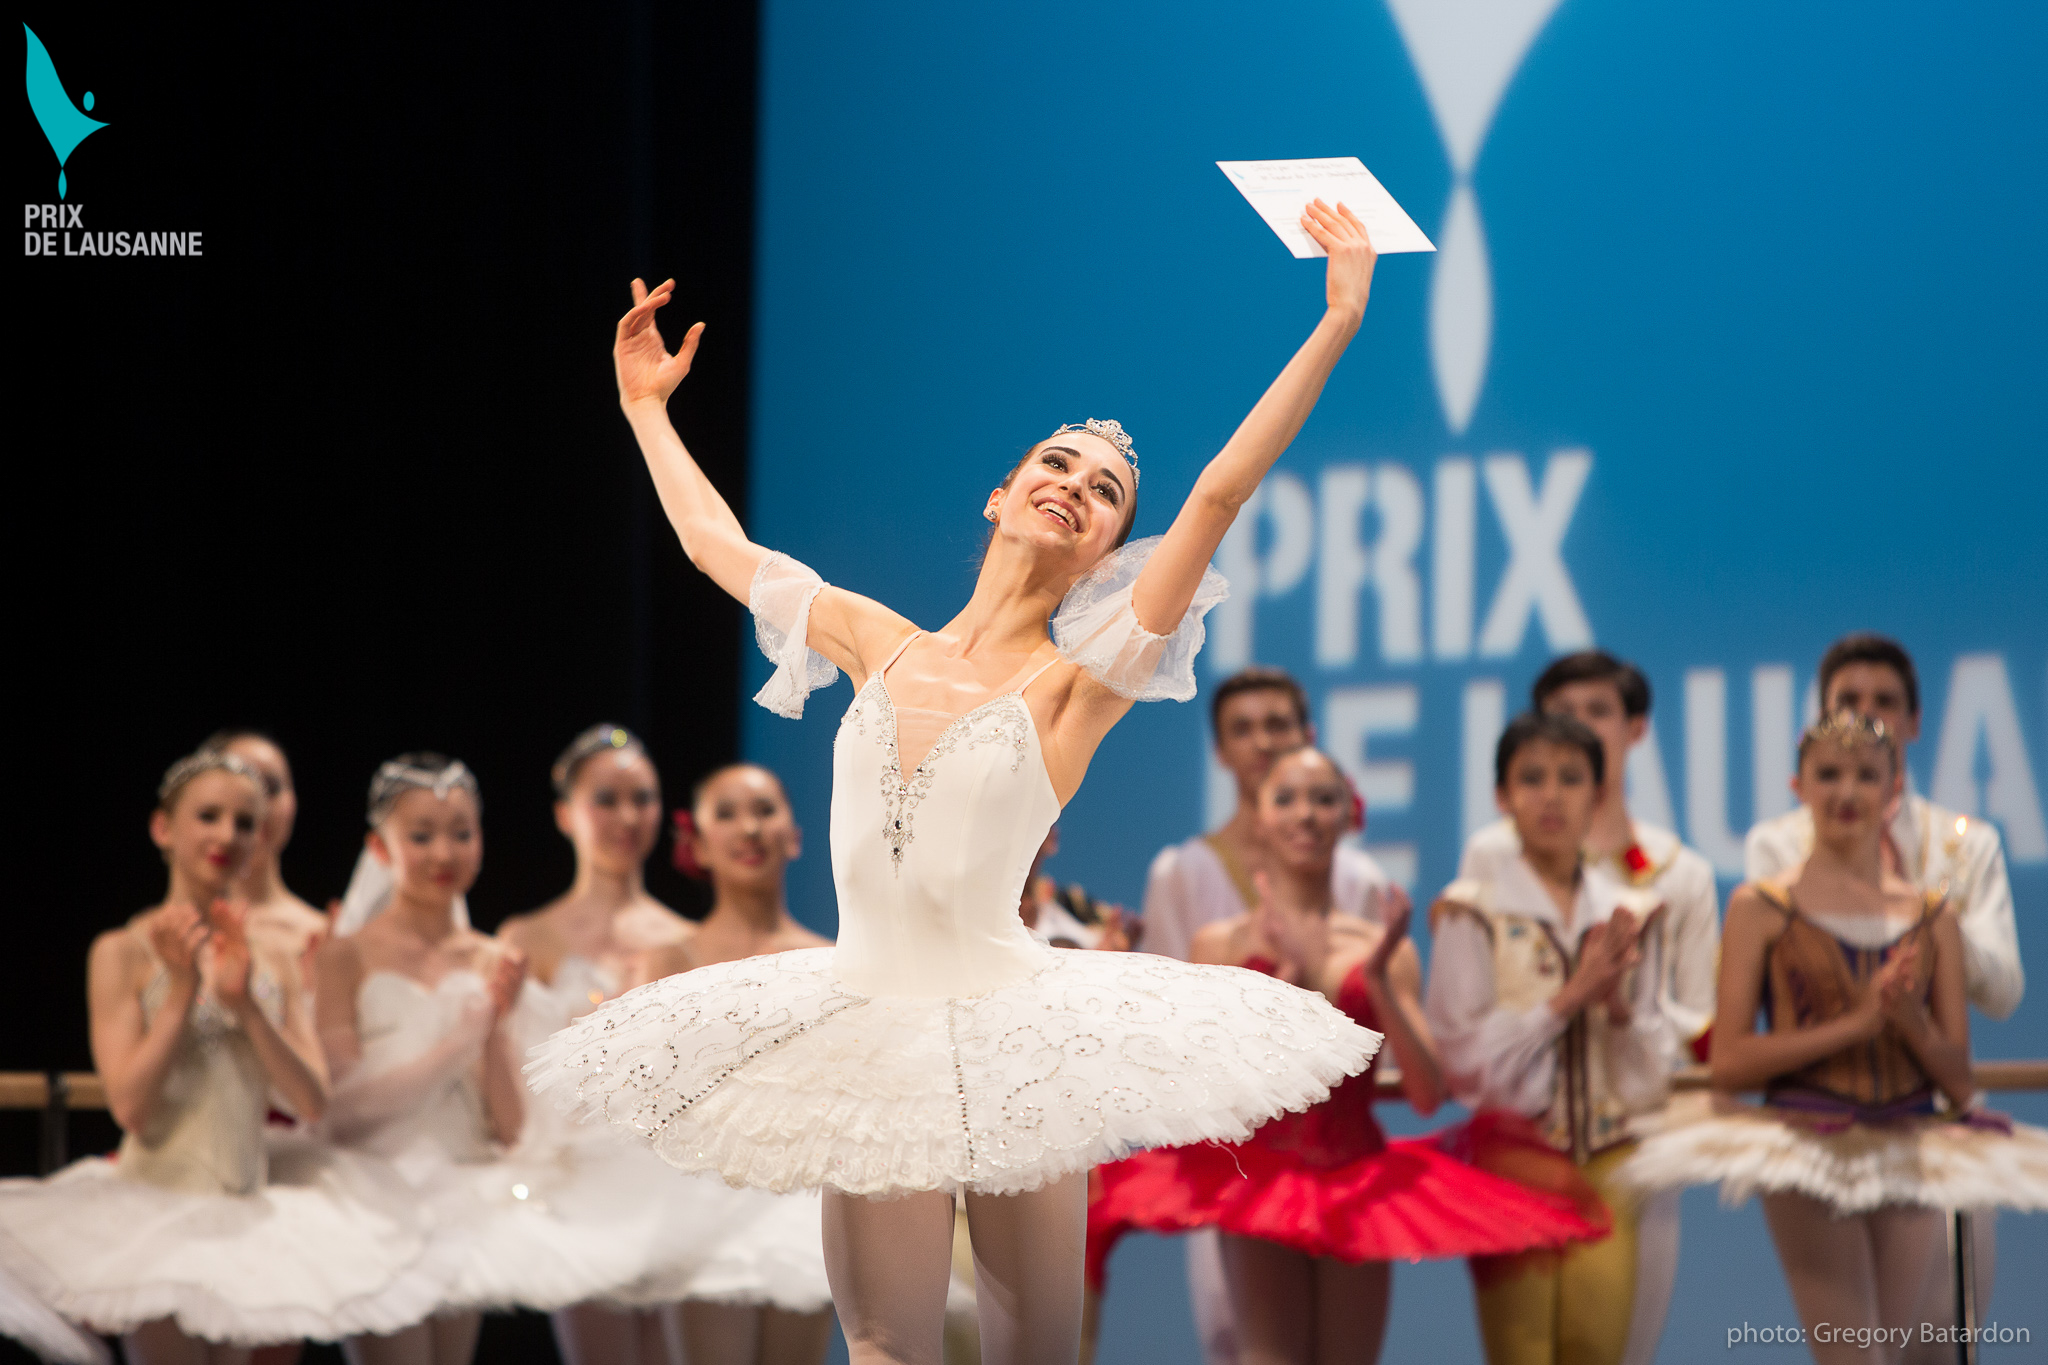 Stars In The Making The 45th Edition Of The Prix De Lausanne A Dancer S Life